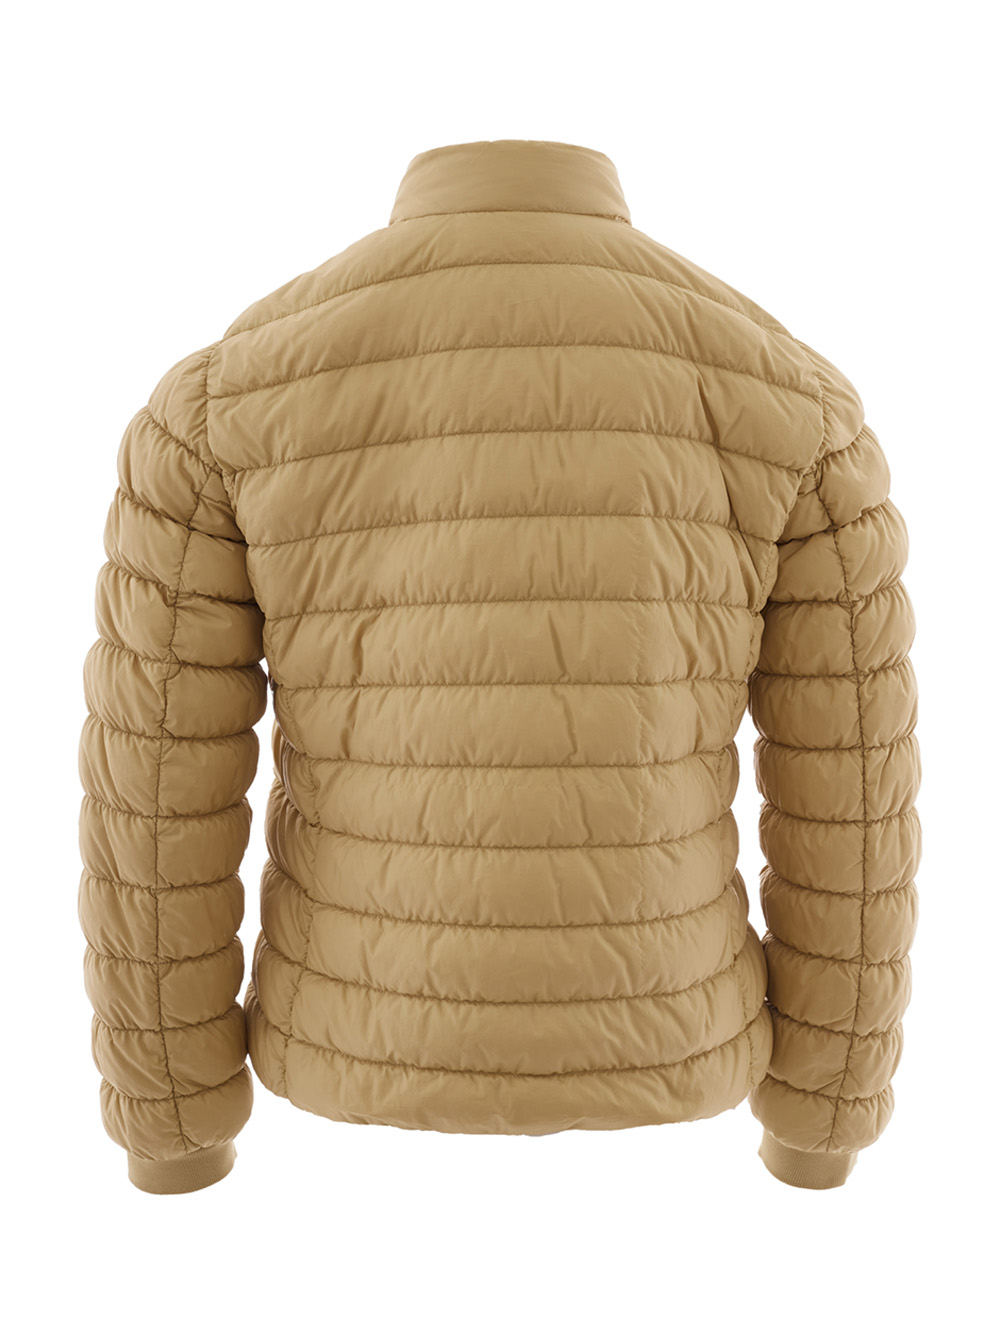 Beige Light Weight Quilted Jacket 23AGO13_S